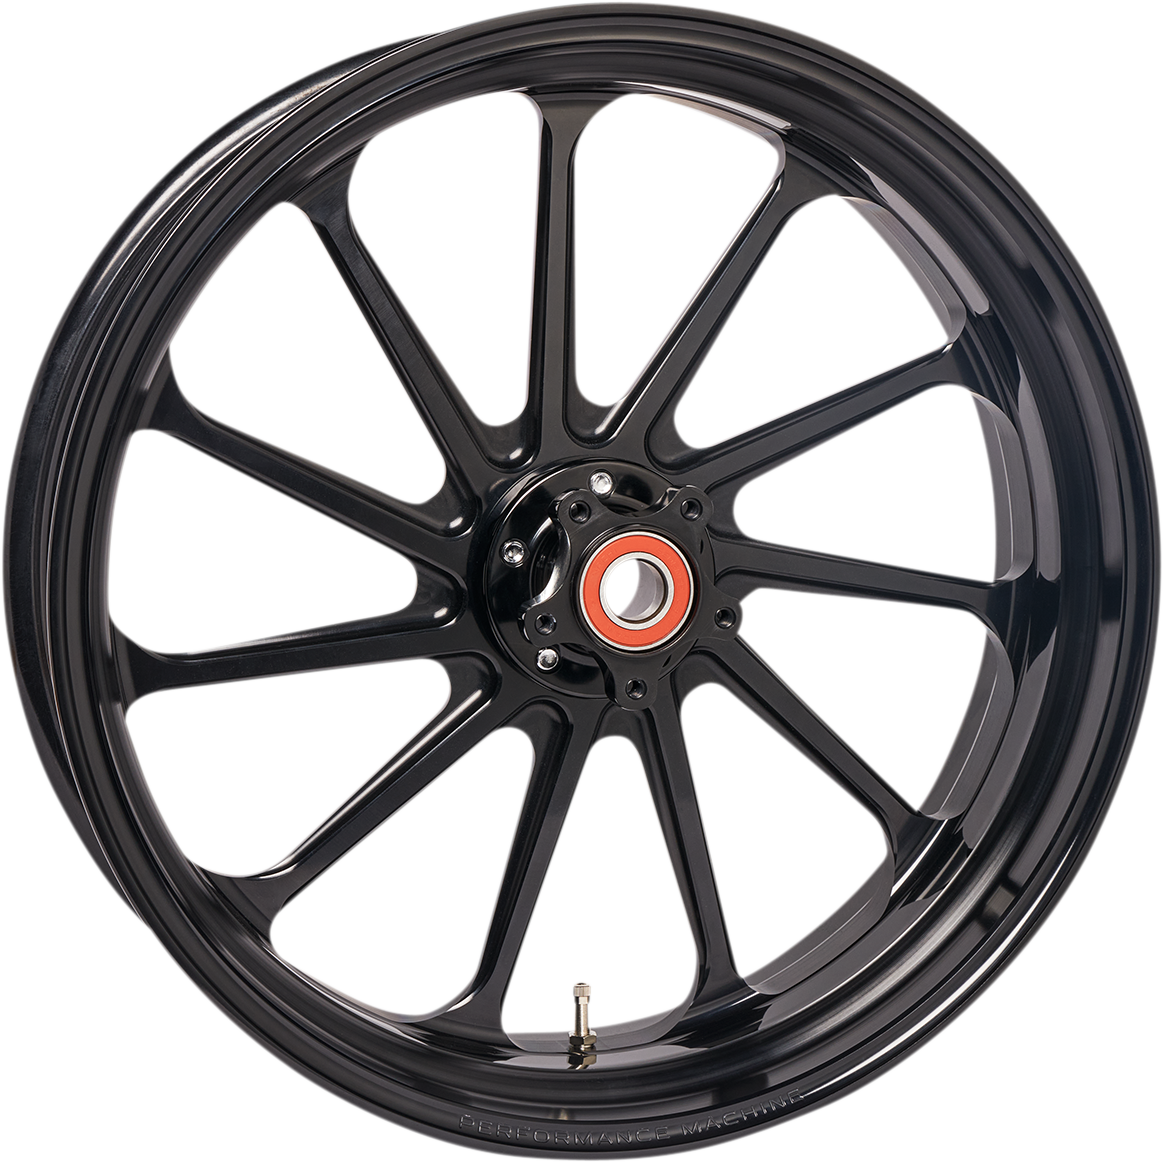 Wheel - Assault - Dual Disc - Front - Gold Ops™ - 21"x3.50" - With ABS